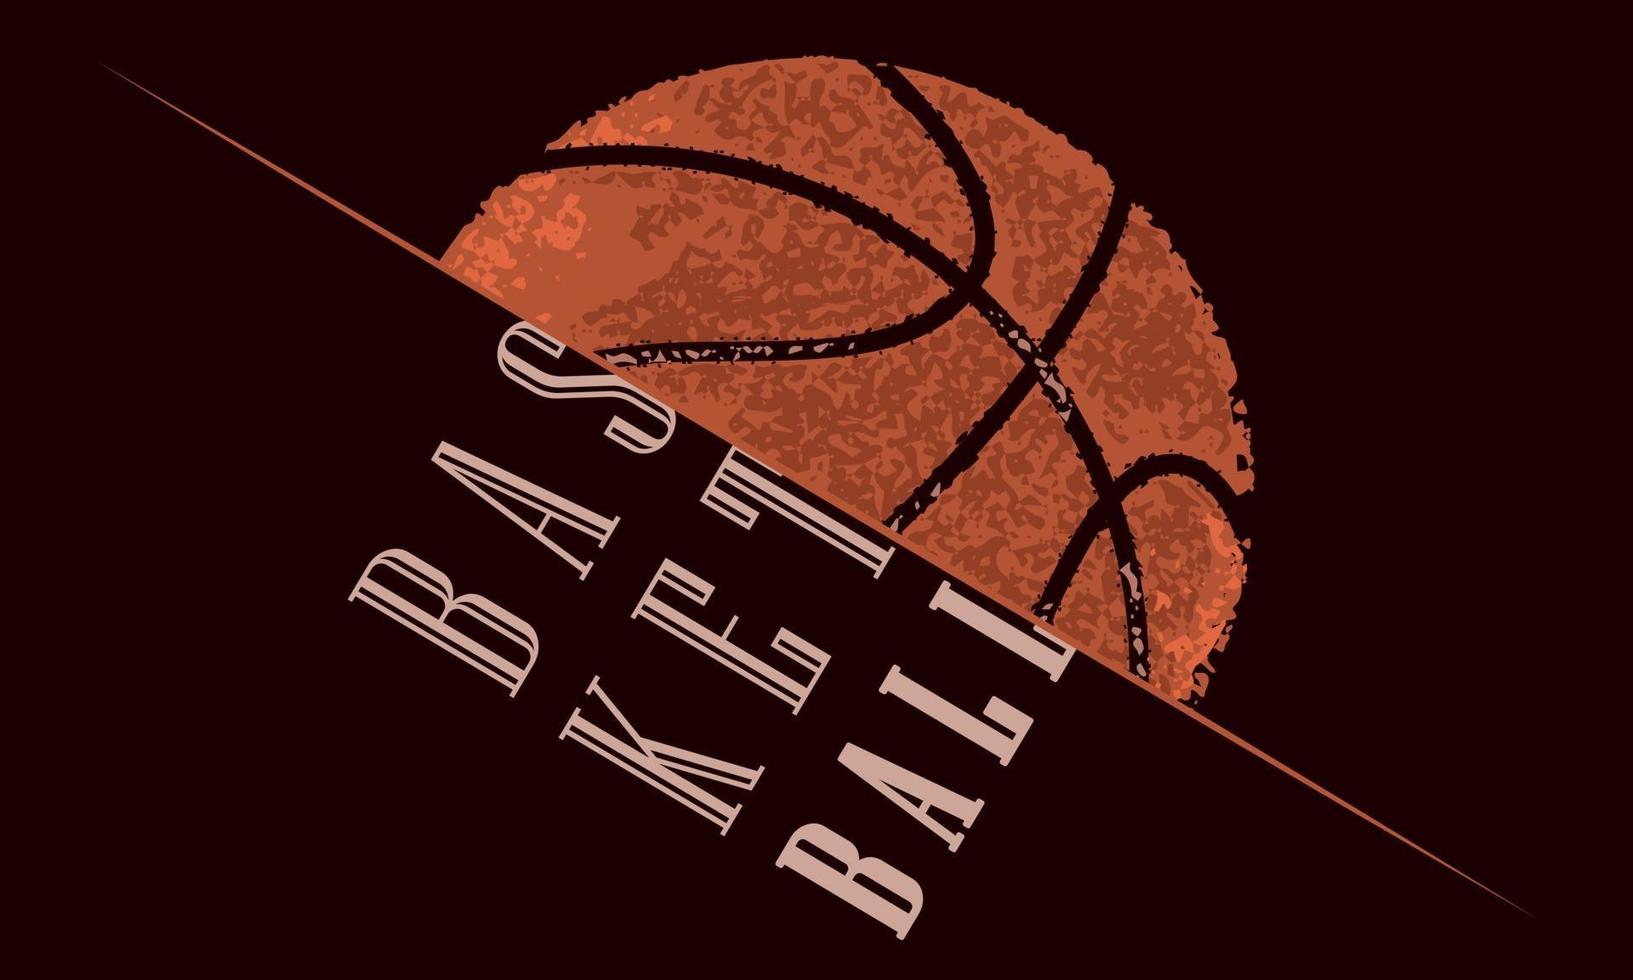 Basketball ball with a grunge texture and text on a poster vector